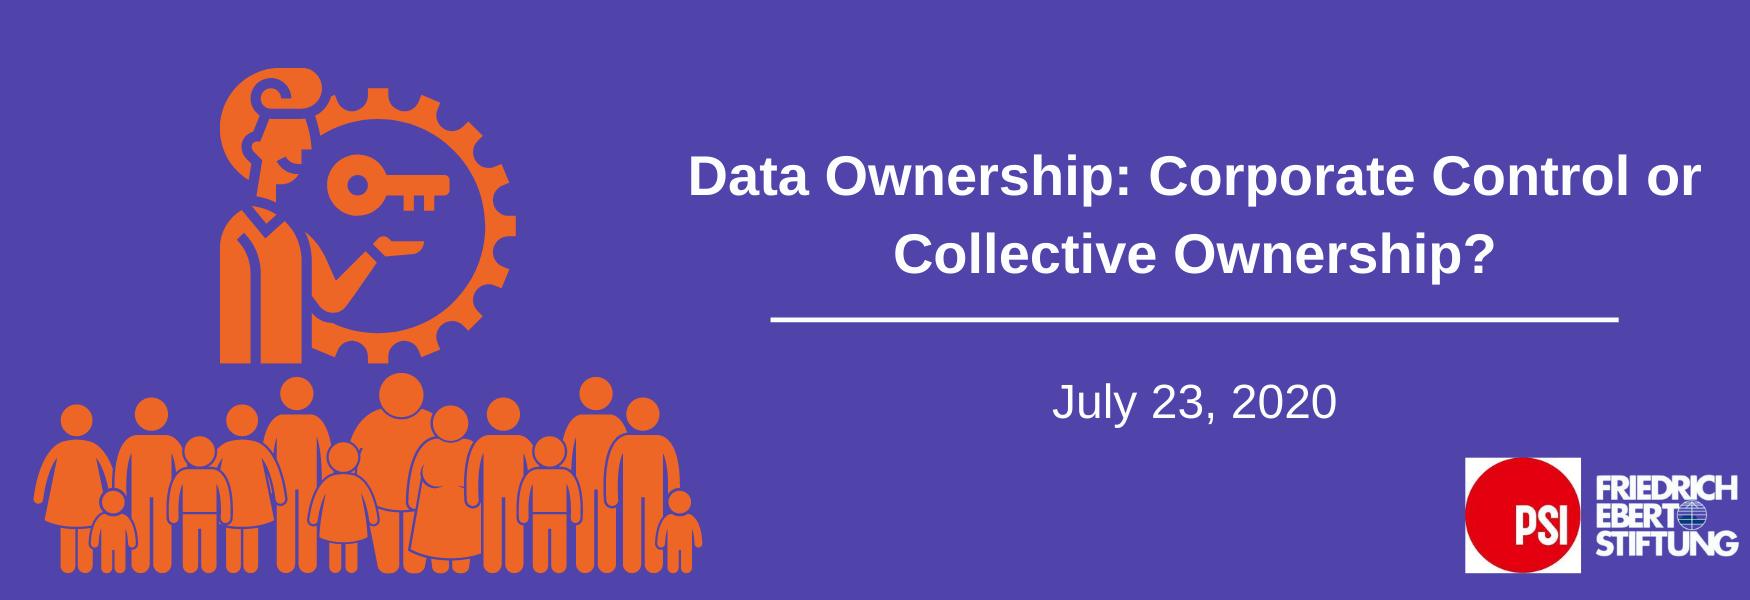 Data Ownership: Corporate Control or Collective Ownership?